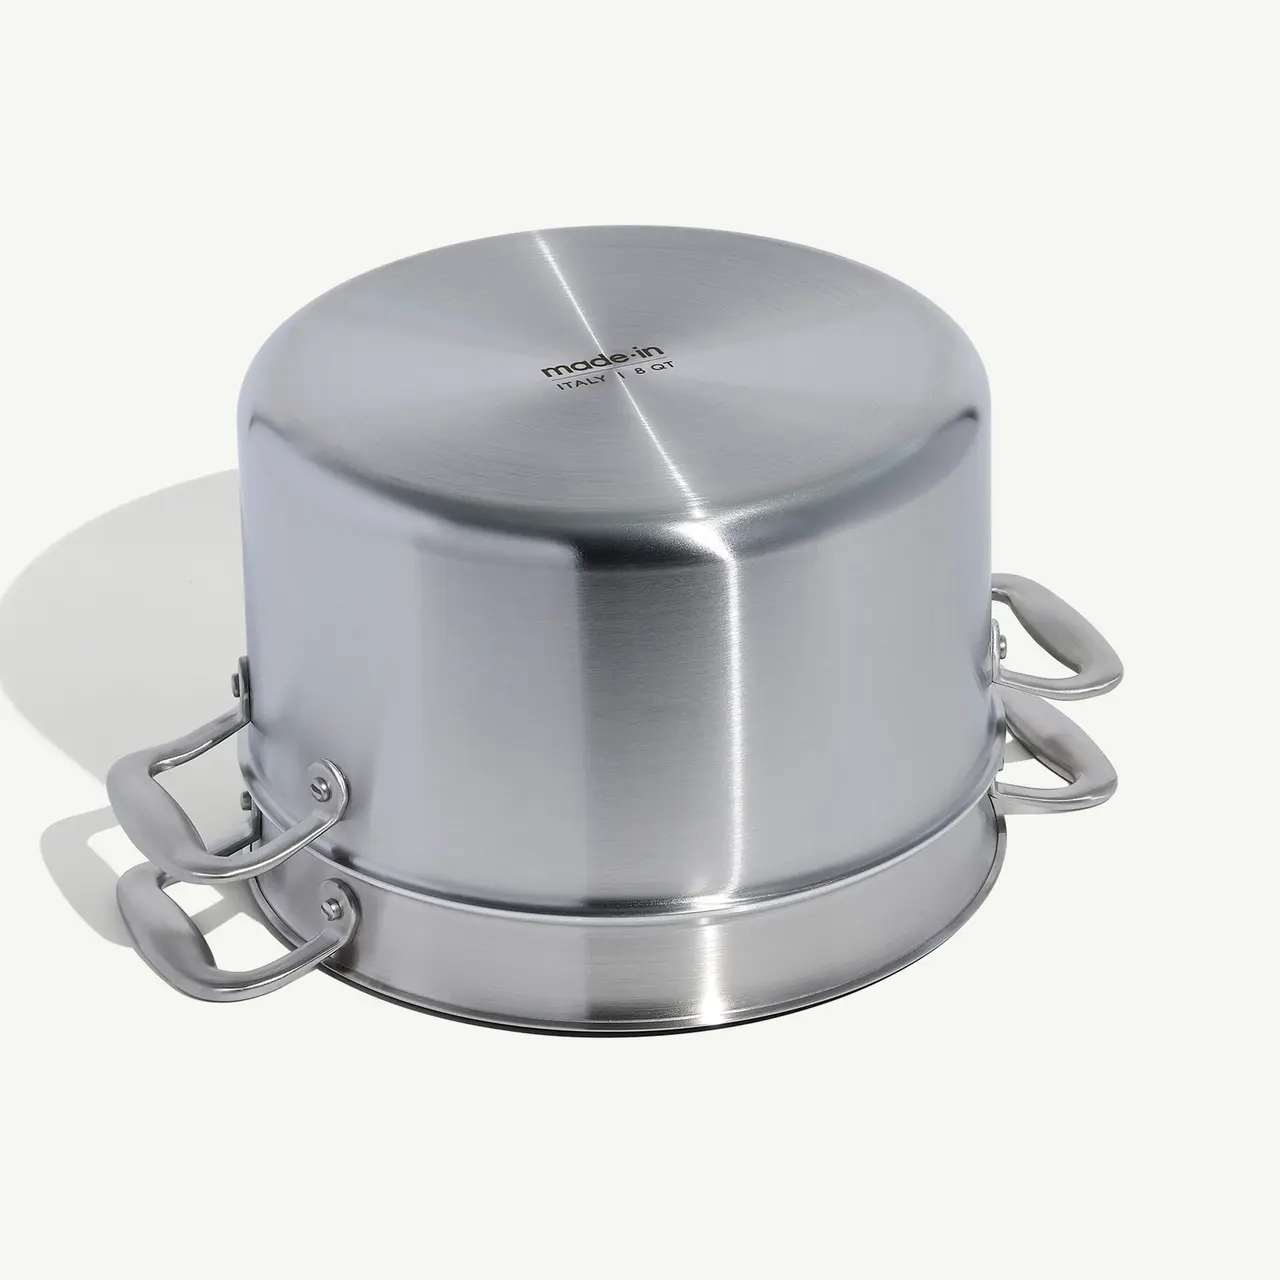 A stainless steel food container with clamps on the side sits on a light surface.